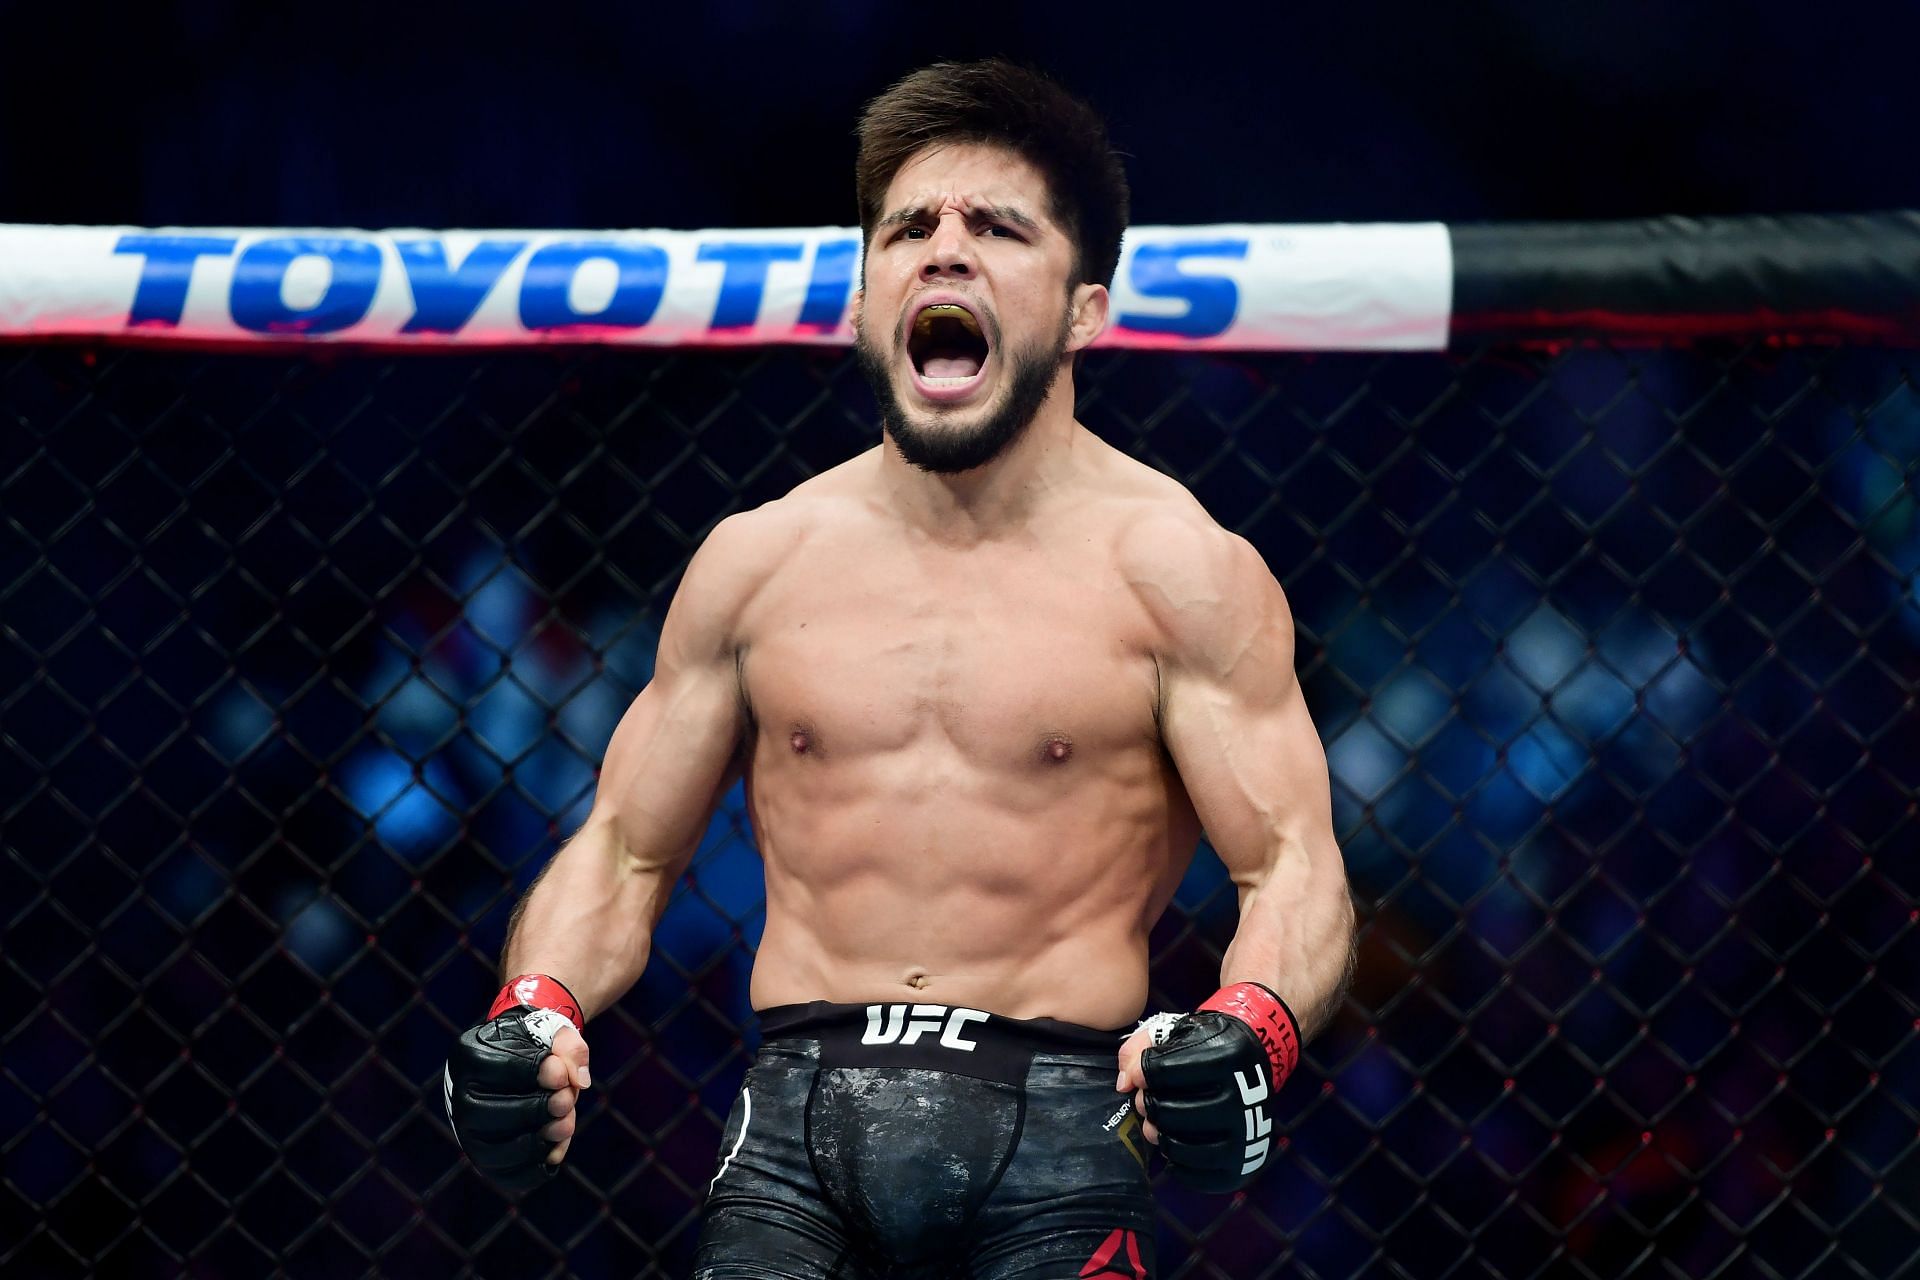 Henry Cejudo's performances are unmatched in the octagon